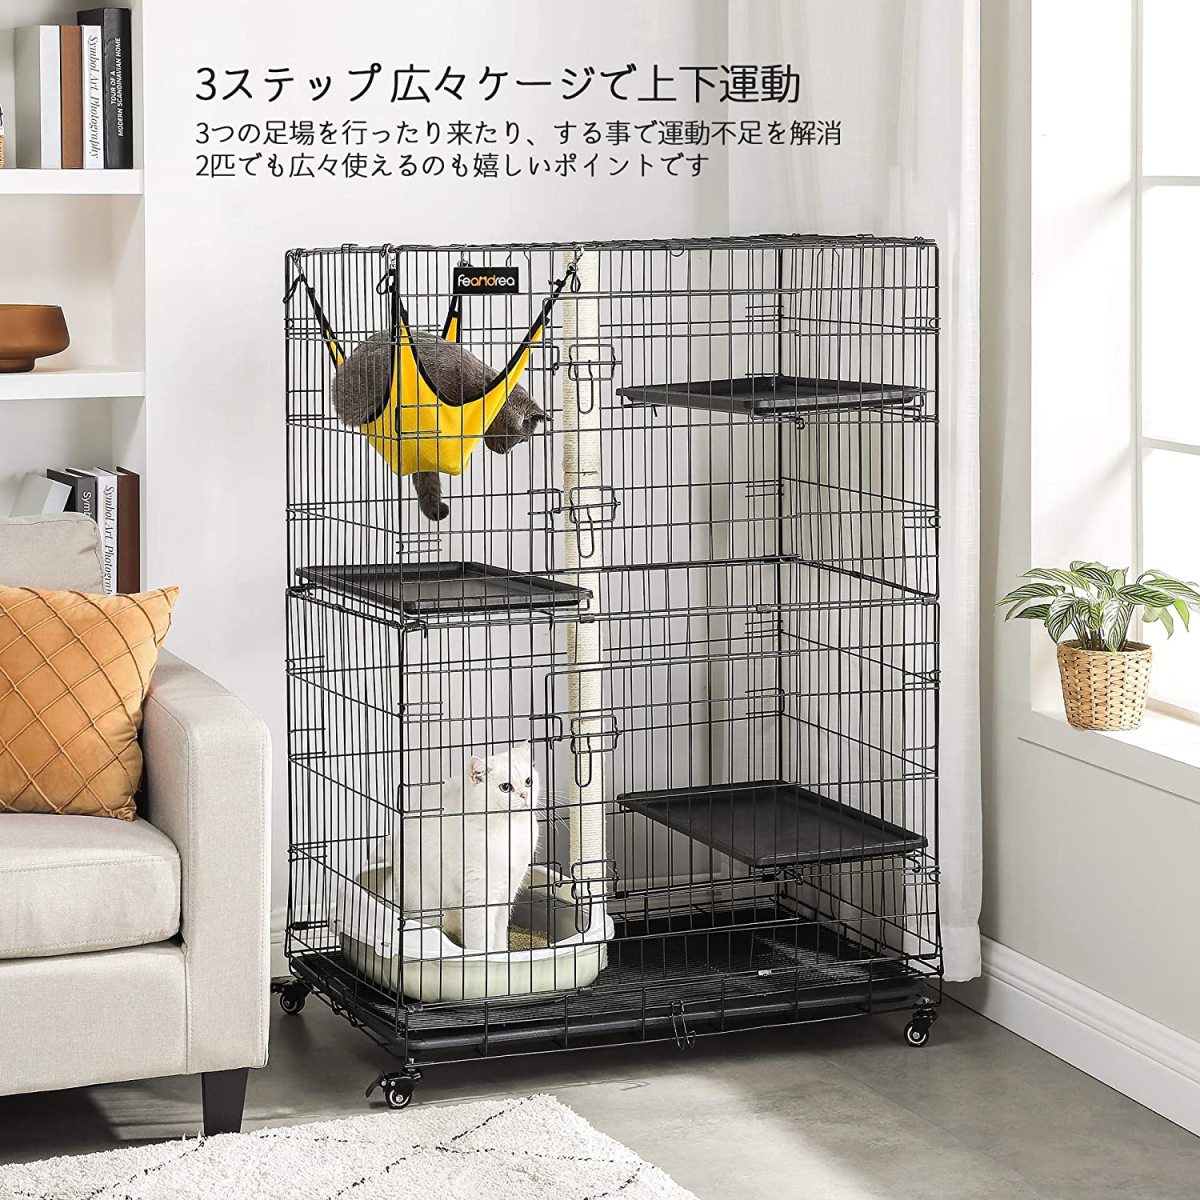  cat for cage large 128×91×57cm 3 floor layer all step nail sharpen paul (pole) attaching cage construction easy fold type movement convenience simple hammock ( extra attaching )